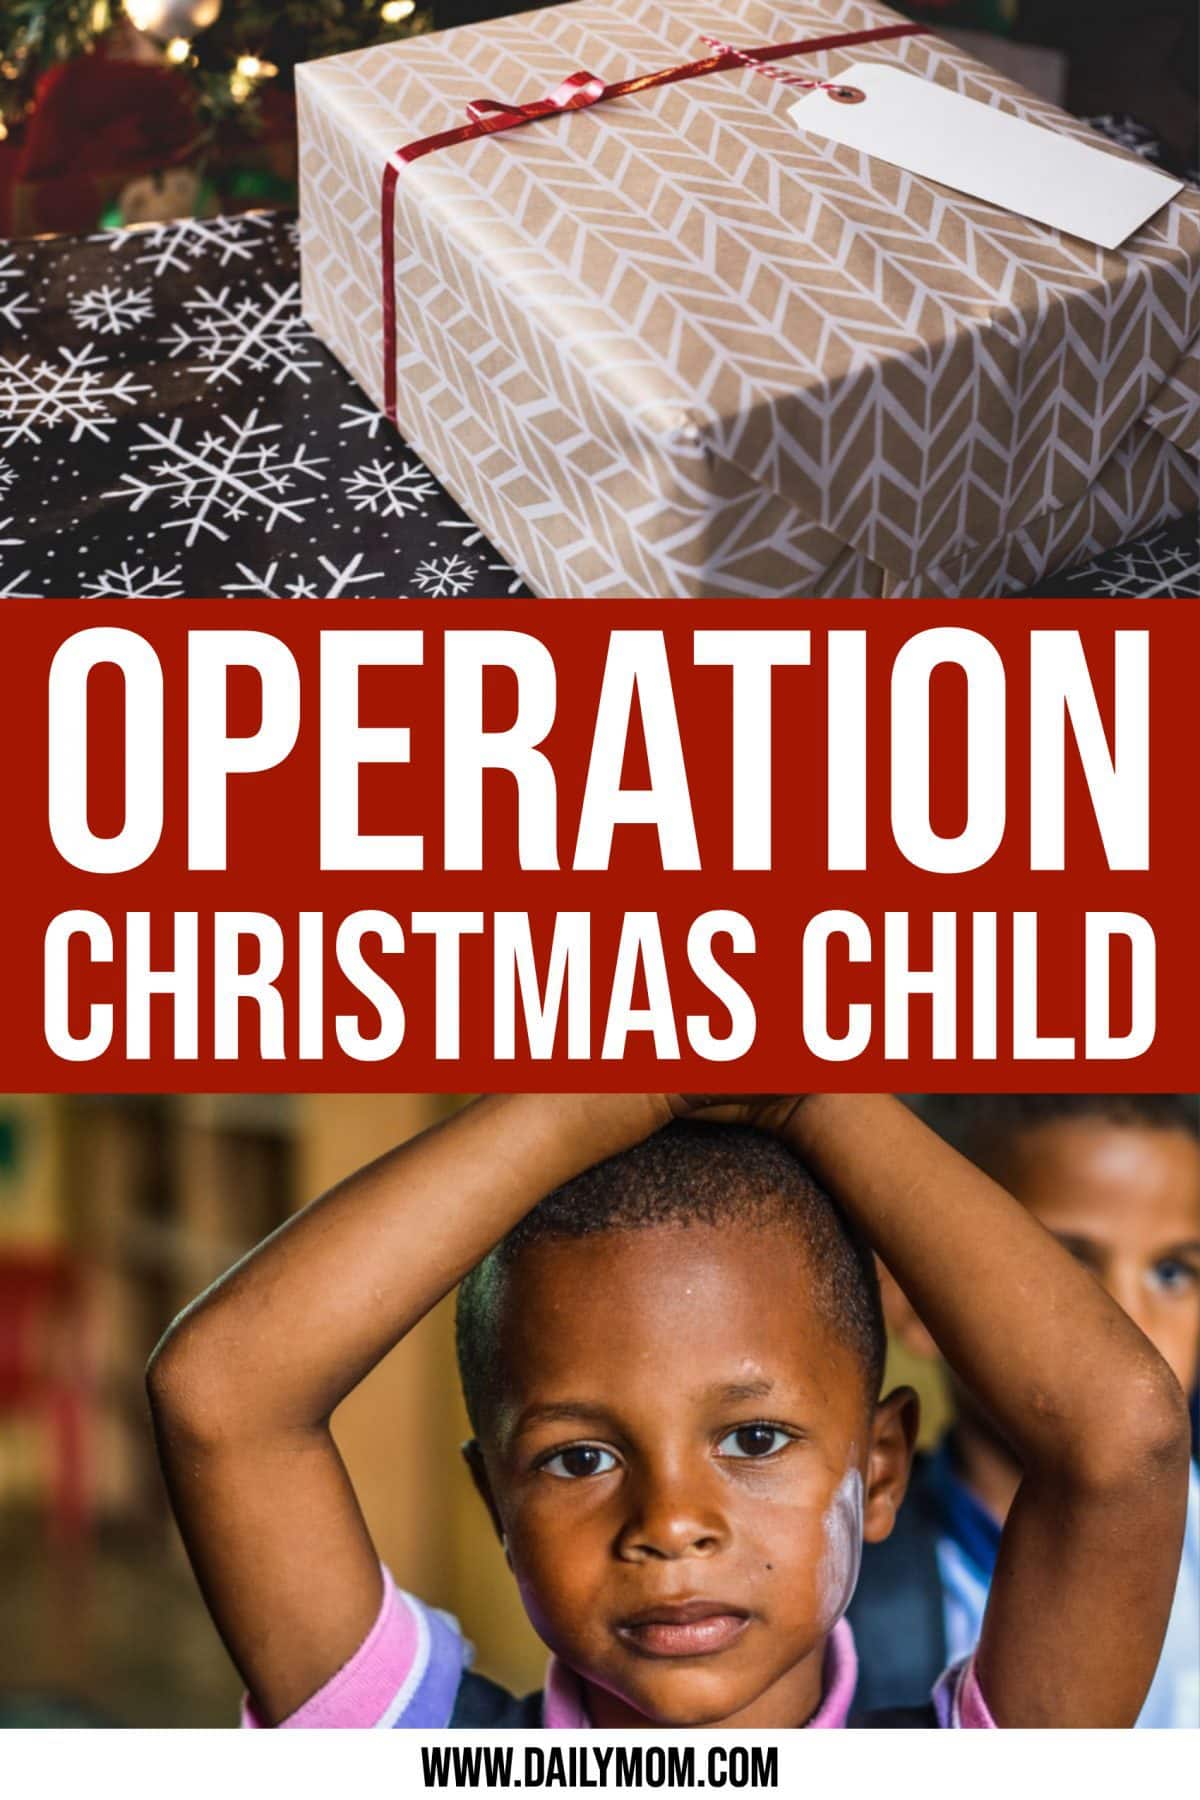 What Is Operation Christmas Child?